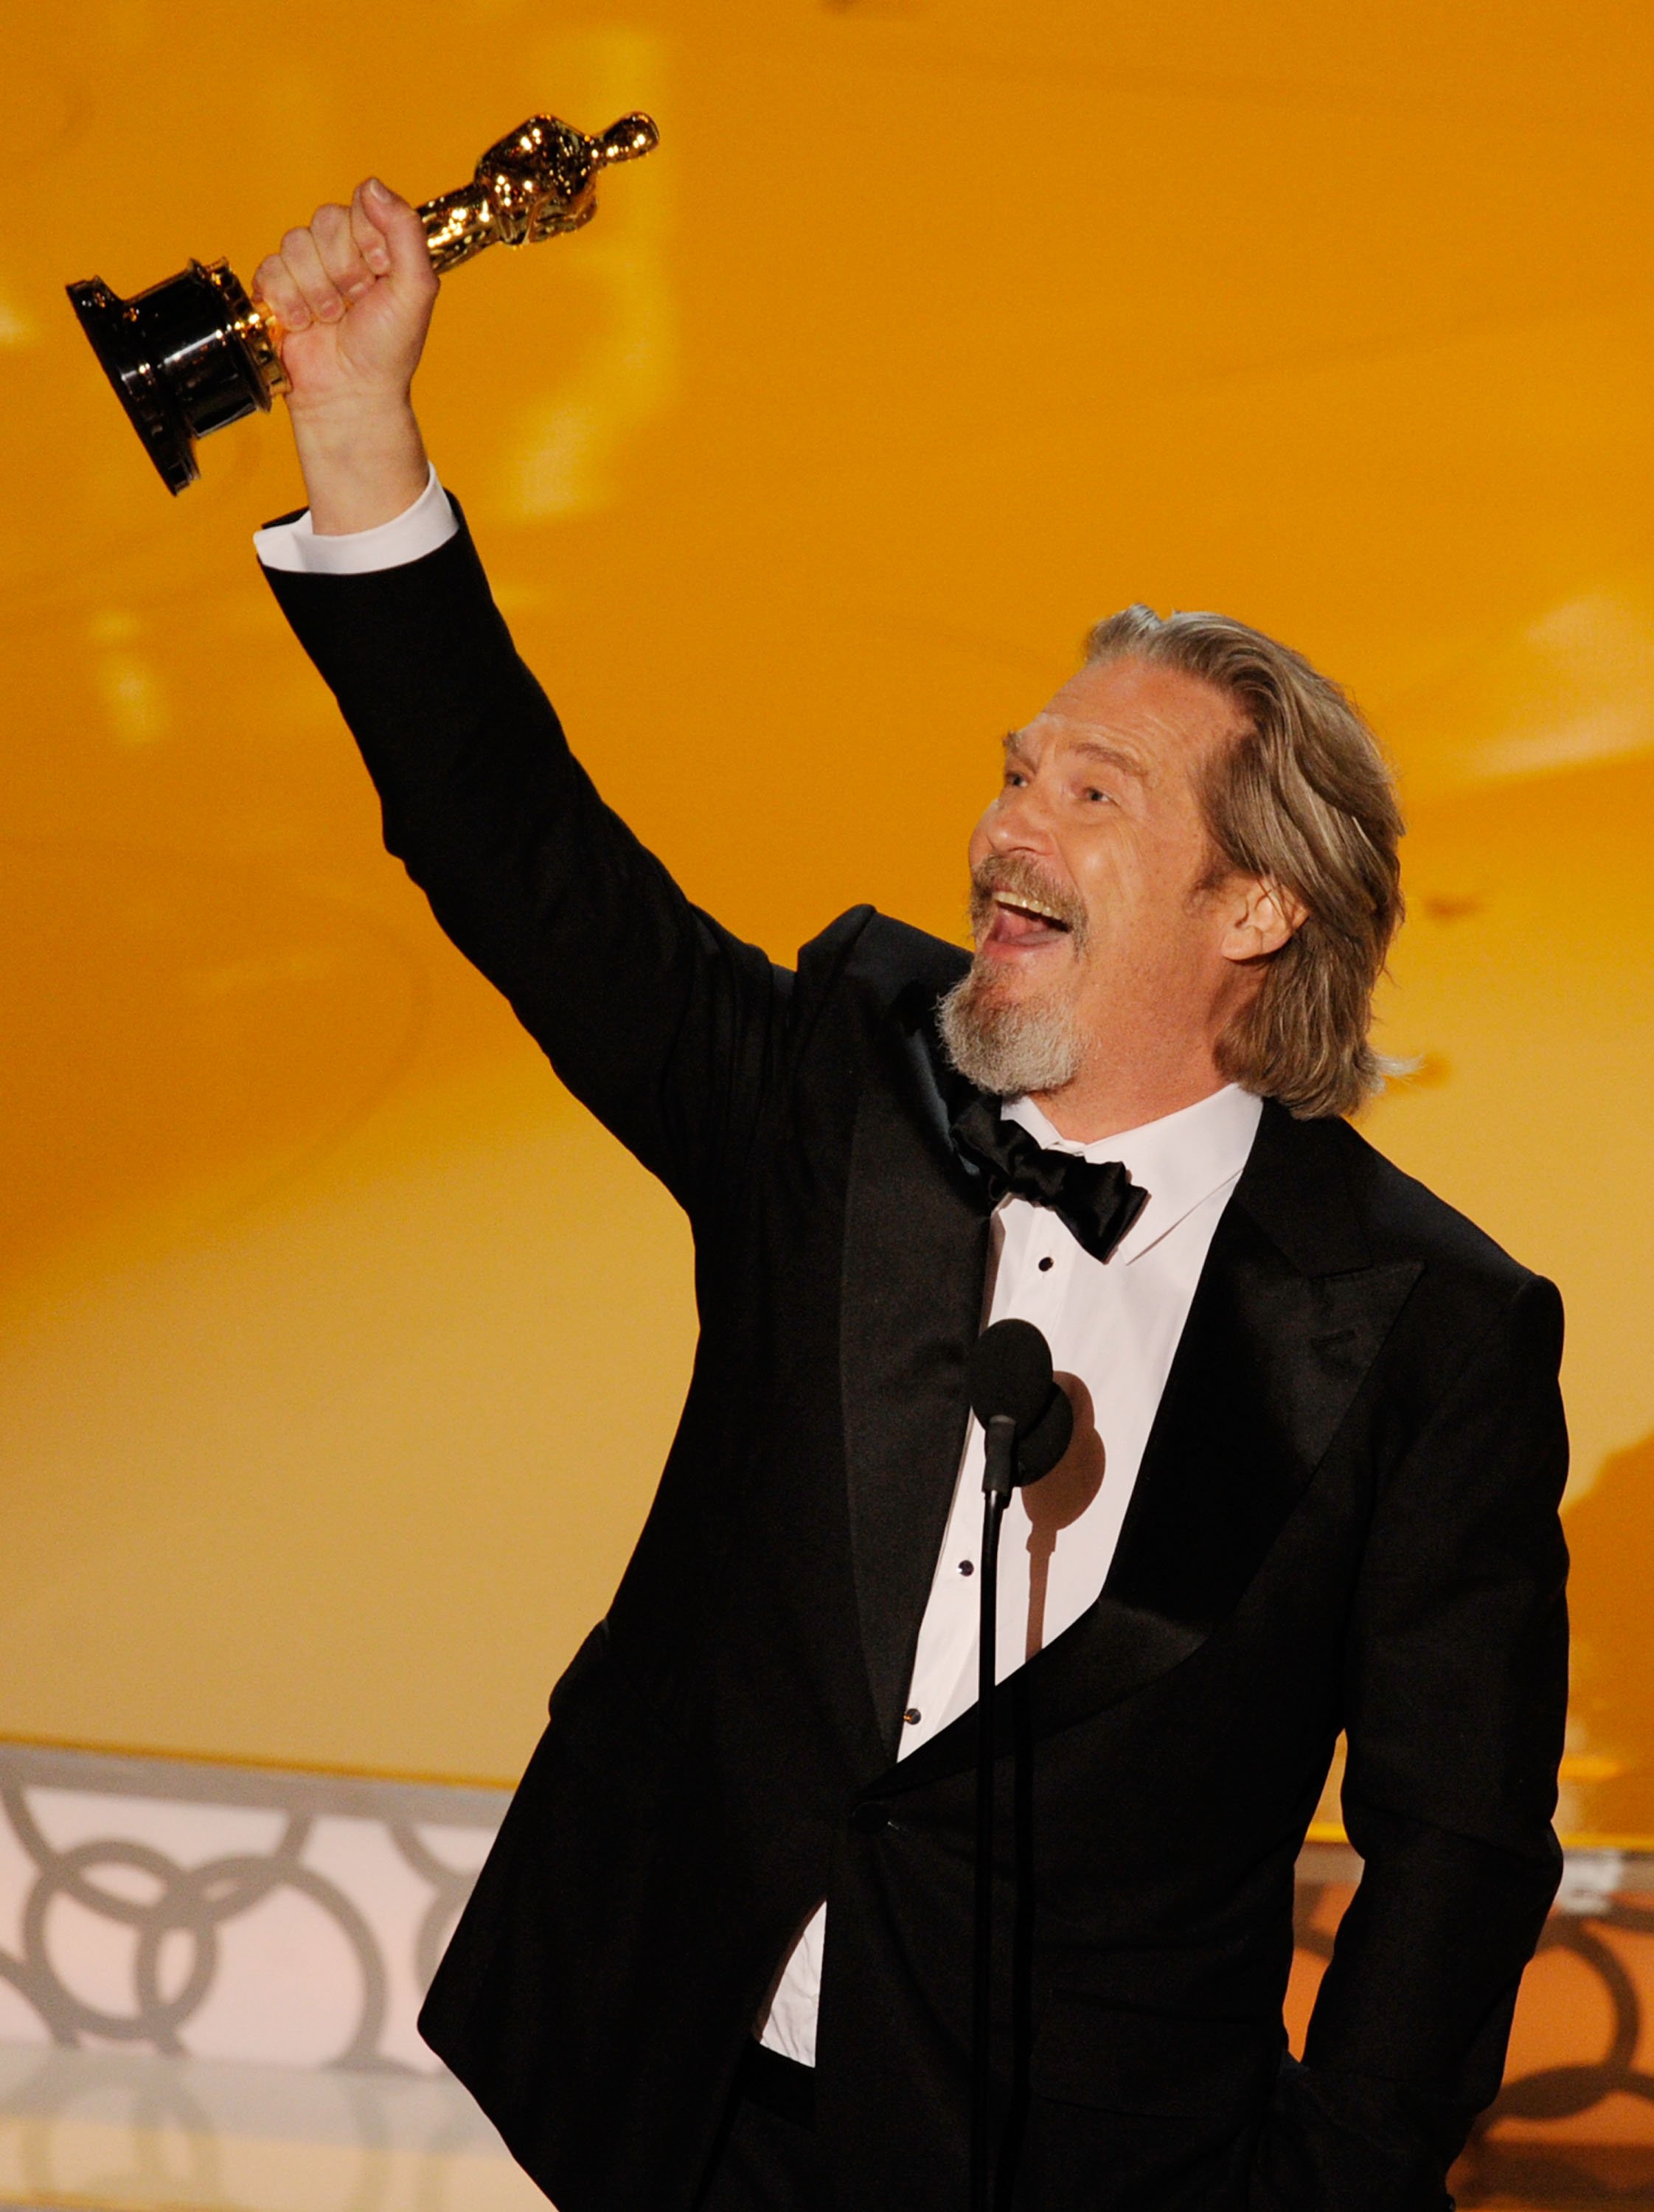 Jeff Bridges in California after winning an award for best actor for "Crazy Heart" in 2010. | Source: Getty Images